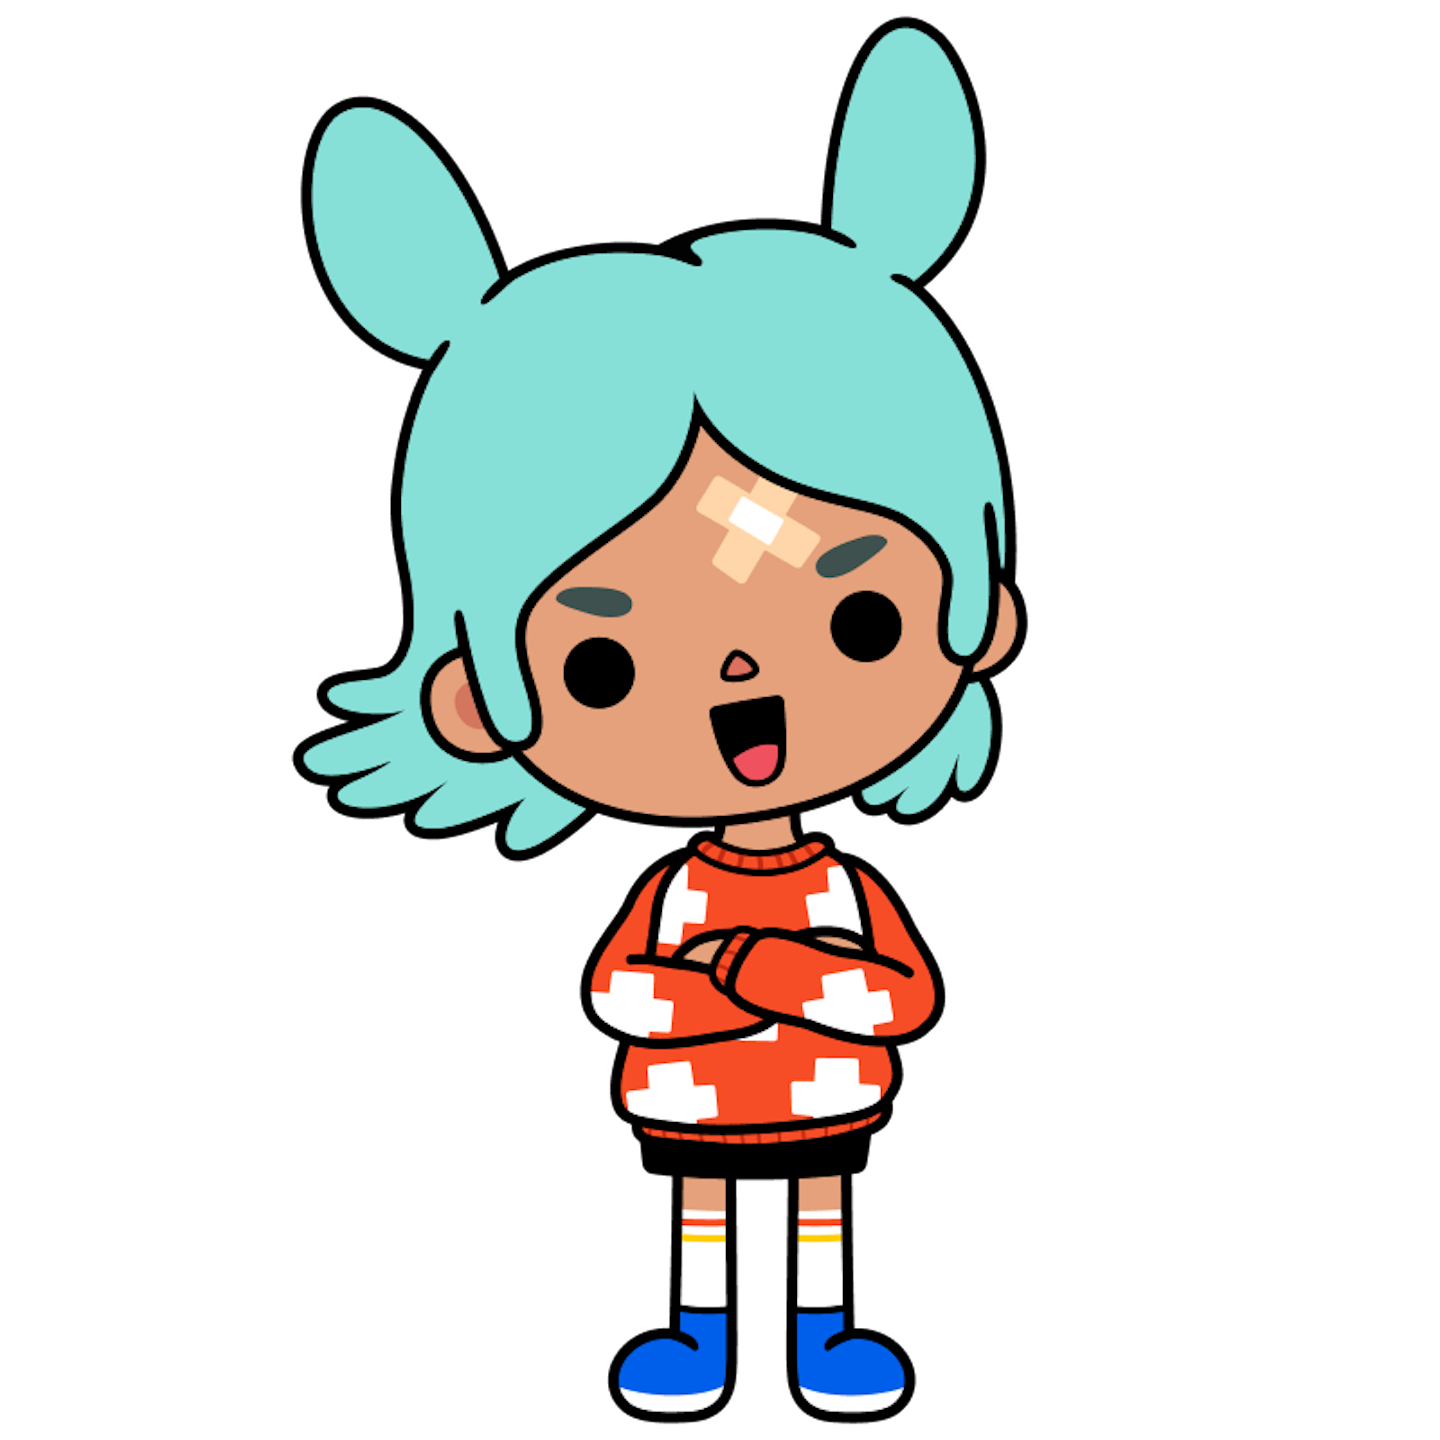 This is an image of Rita, a character from Toca Boca World, standing with her arms crossed. She has her mouth open as if smiling widely or saying something